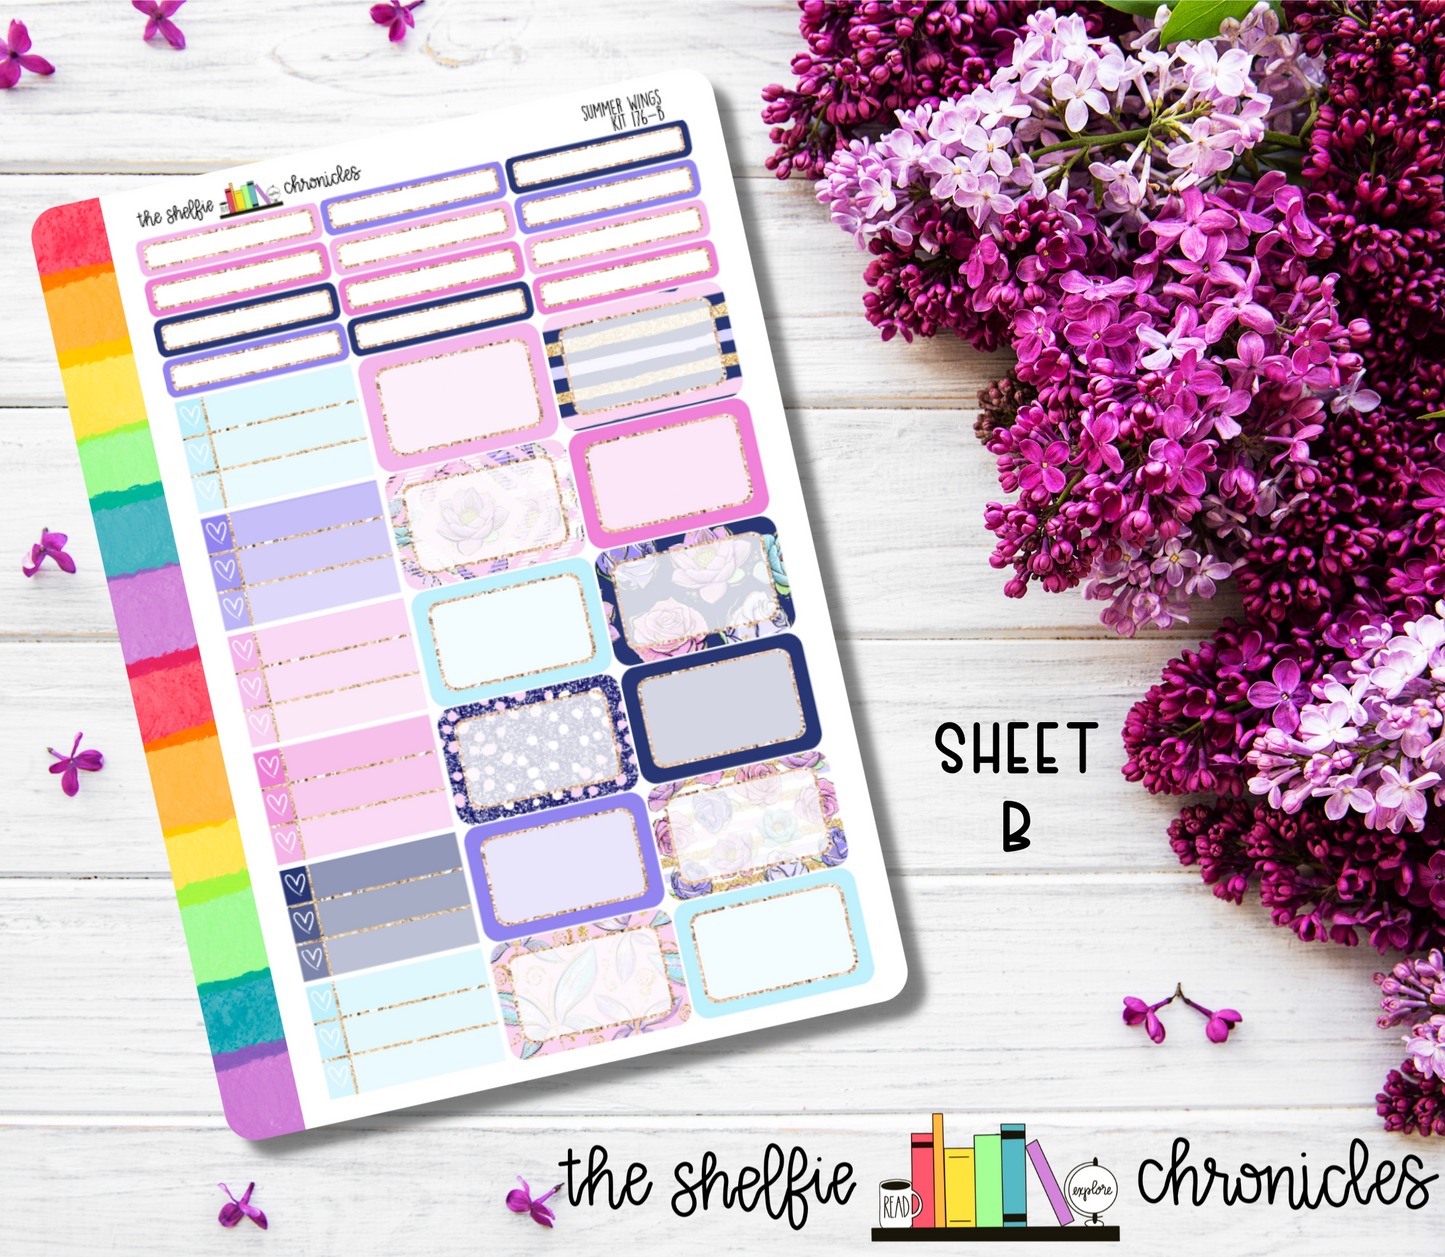 Kit 176 - Summer Wings Weekly Kit - Die Cut Stickers - Repositionable Paper - Made To Fit 7x9 Planners